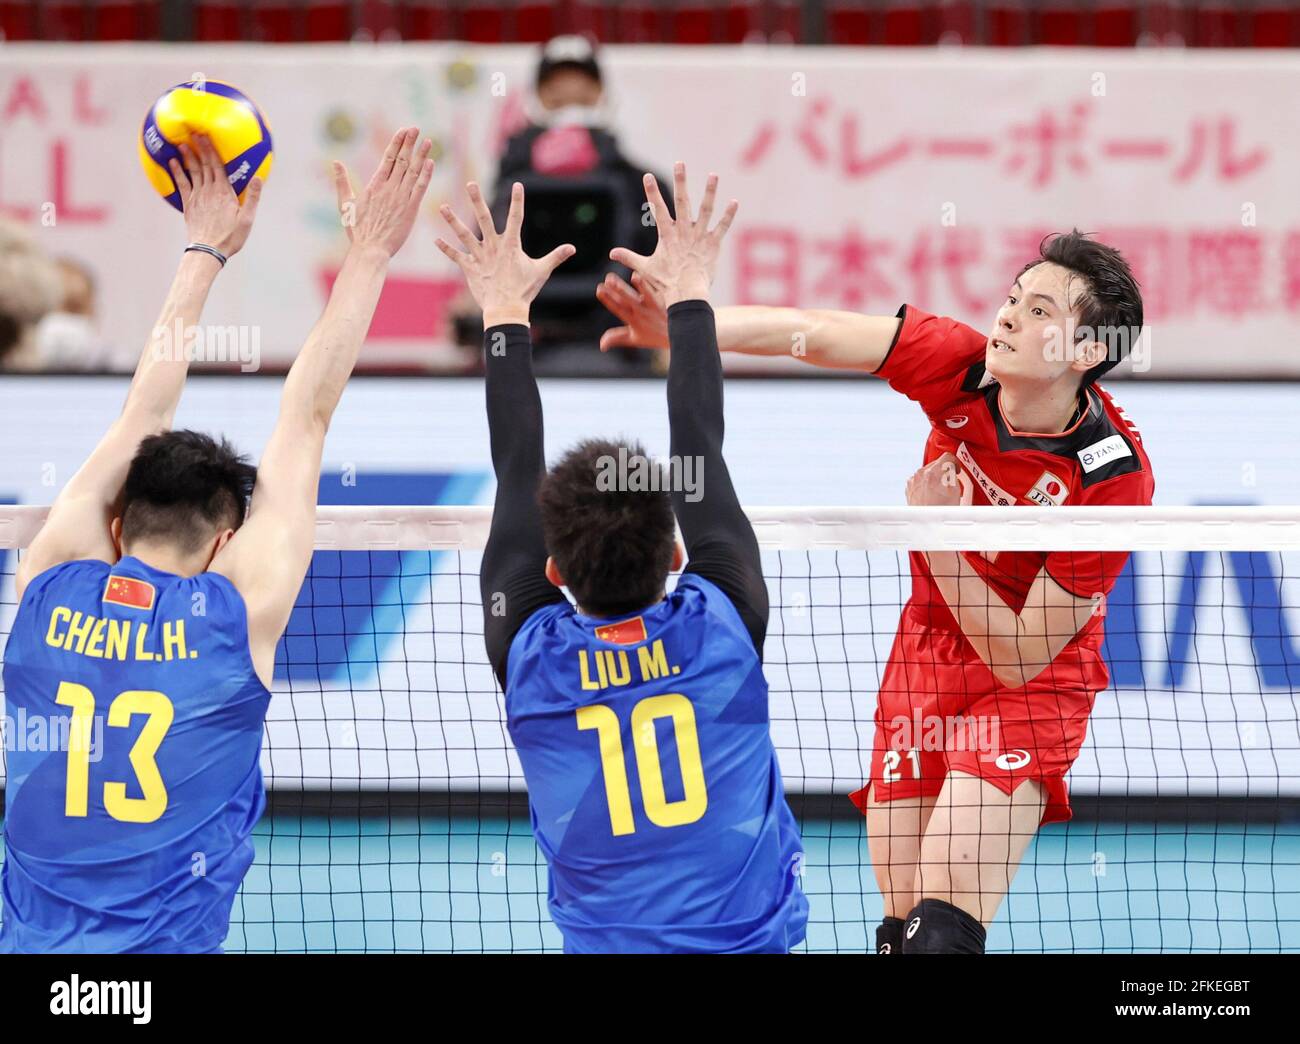 Japan S Ran Takahashi R Spikes During The Second Set Of A Men S